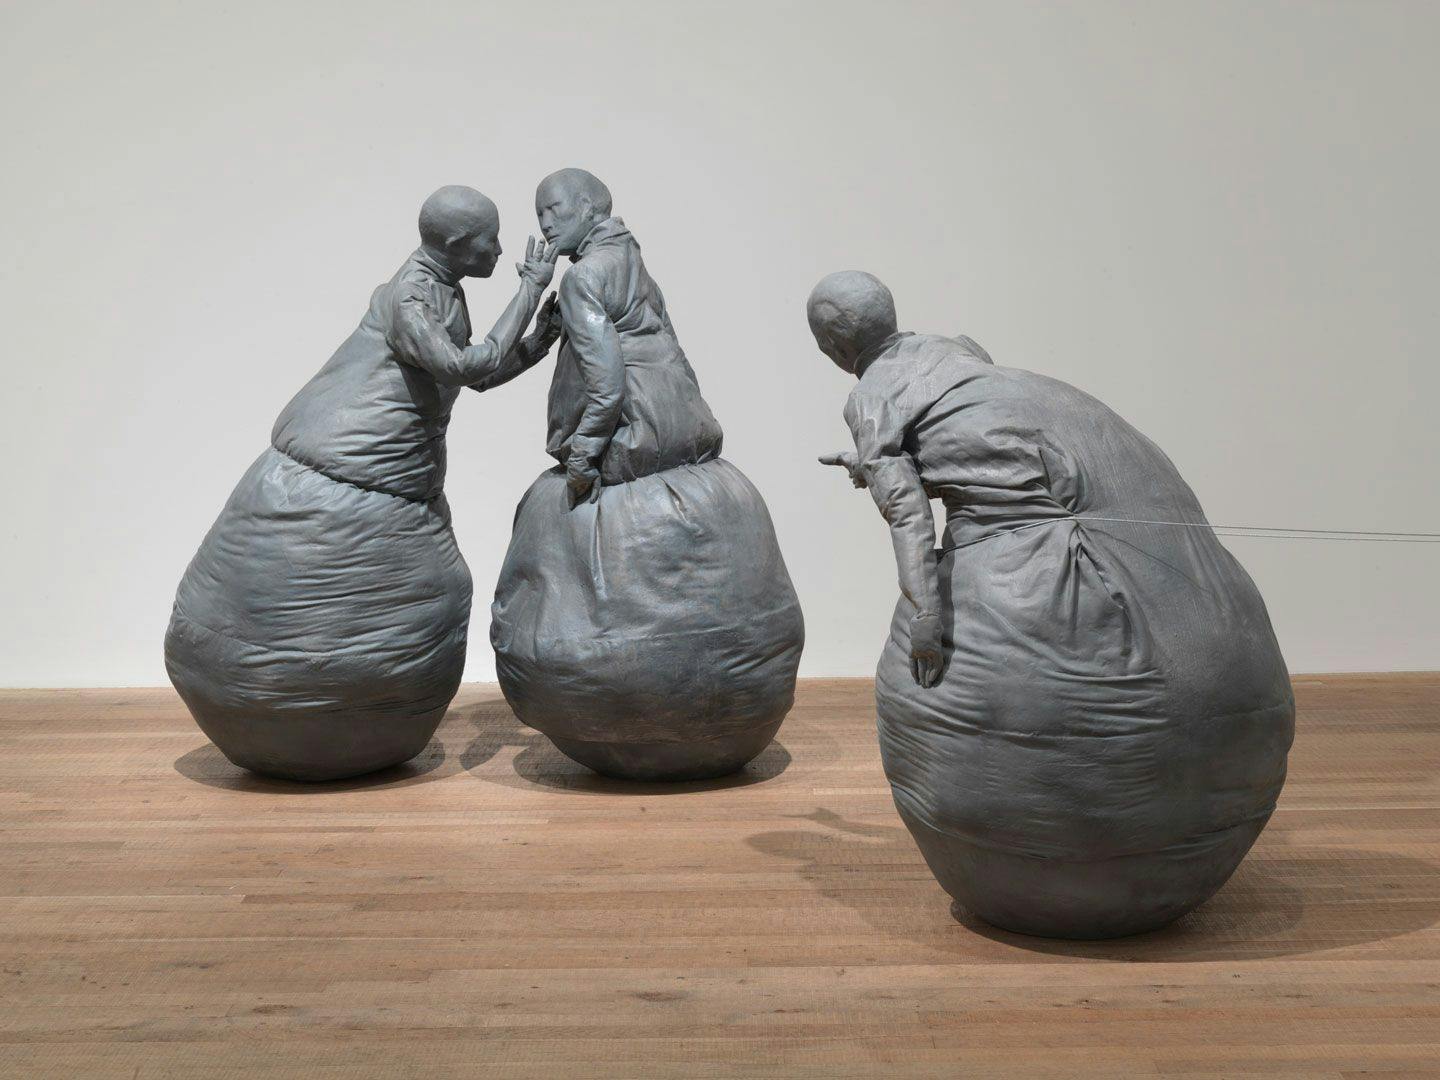 A mixed media sculptural installation by Juan Munoz, titled Conversation Piece, dated 1996, at Tate Modern, in London, England, in 2008. 